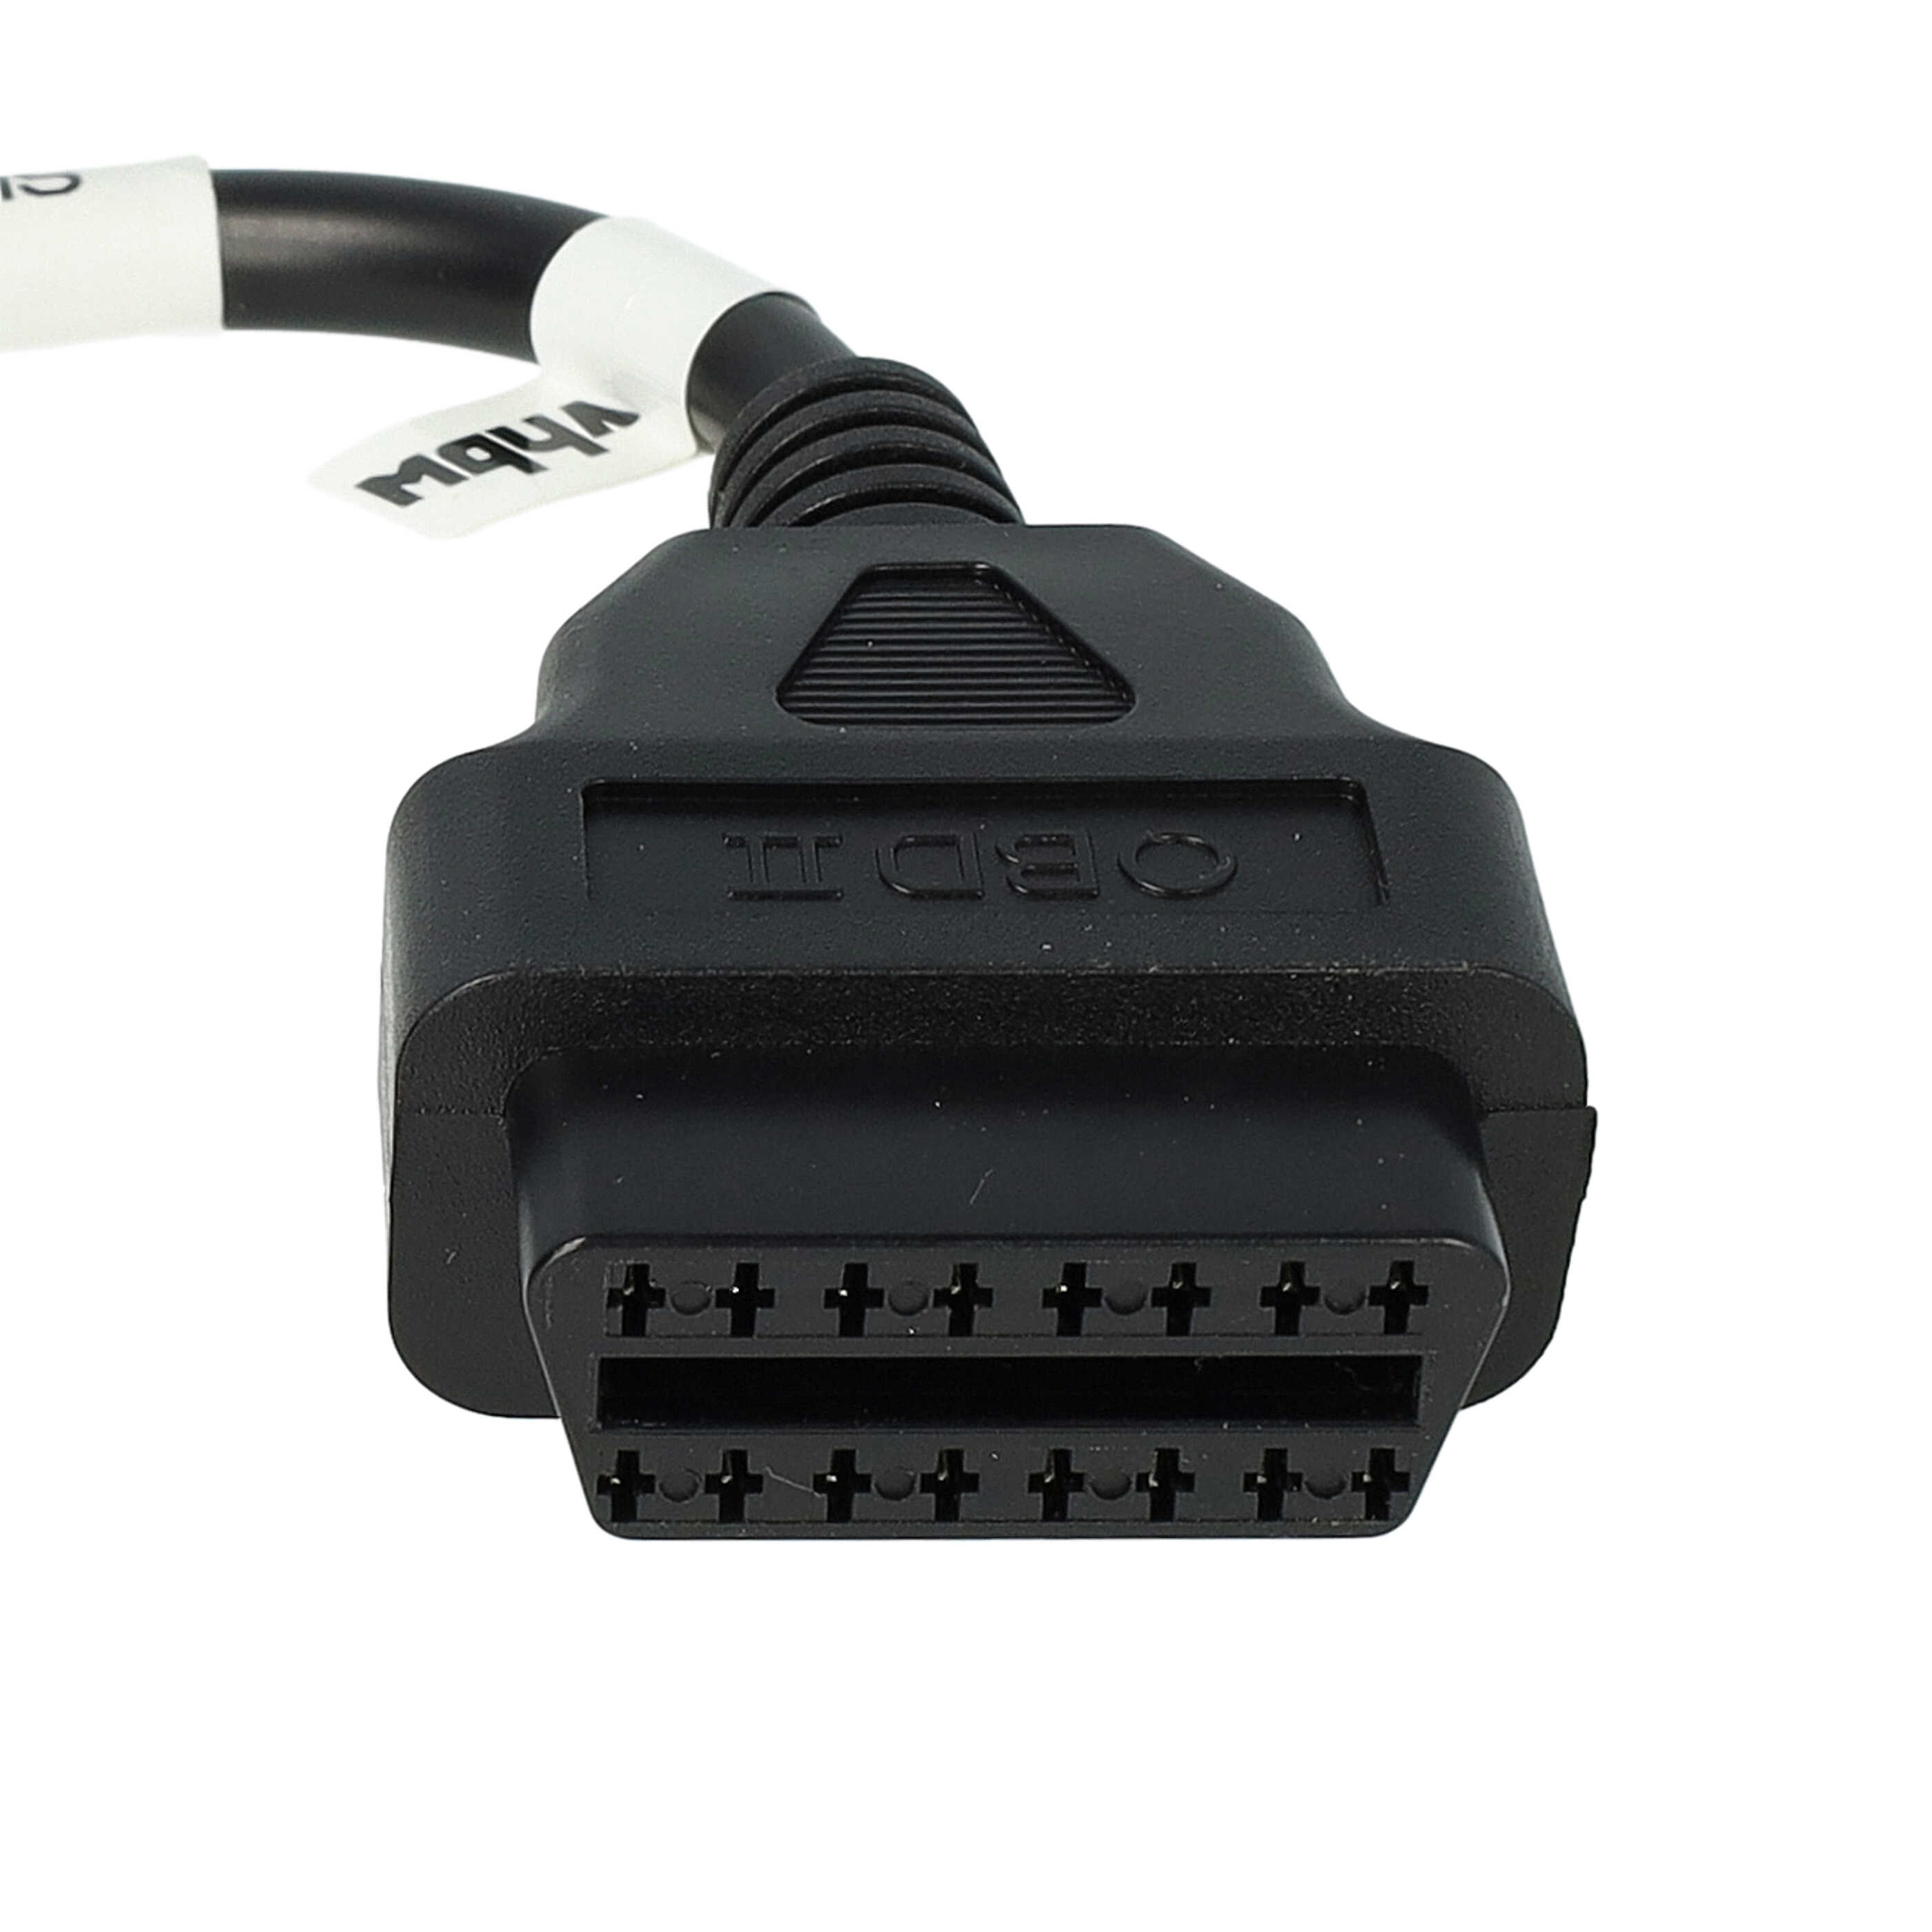 vhbw OBD2 Adapter 6 Pin to OBD2 16Pin suitable for Suzuki AN 400 (2003 - 2019) Motorbike - 10 cm